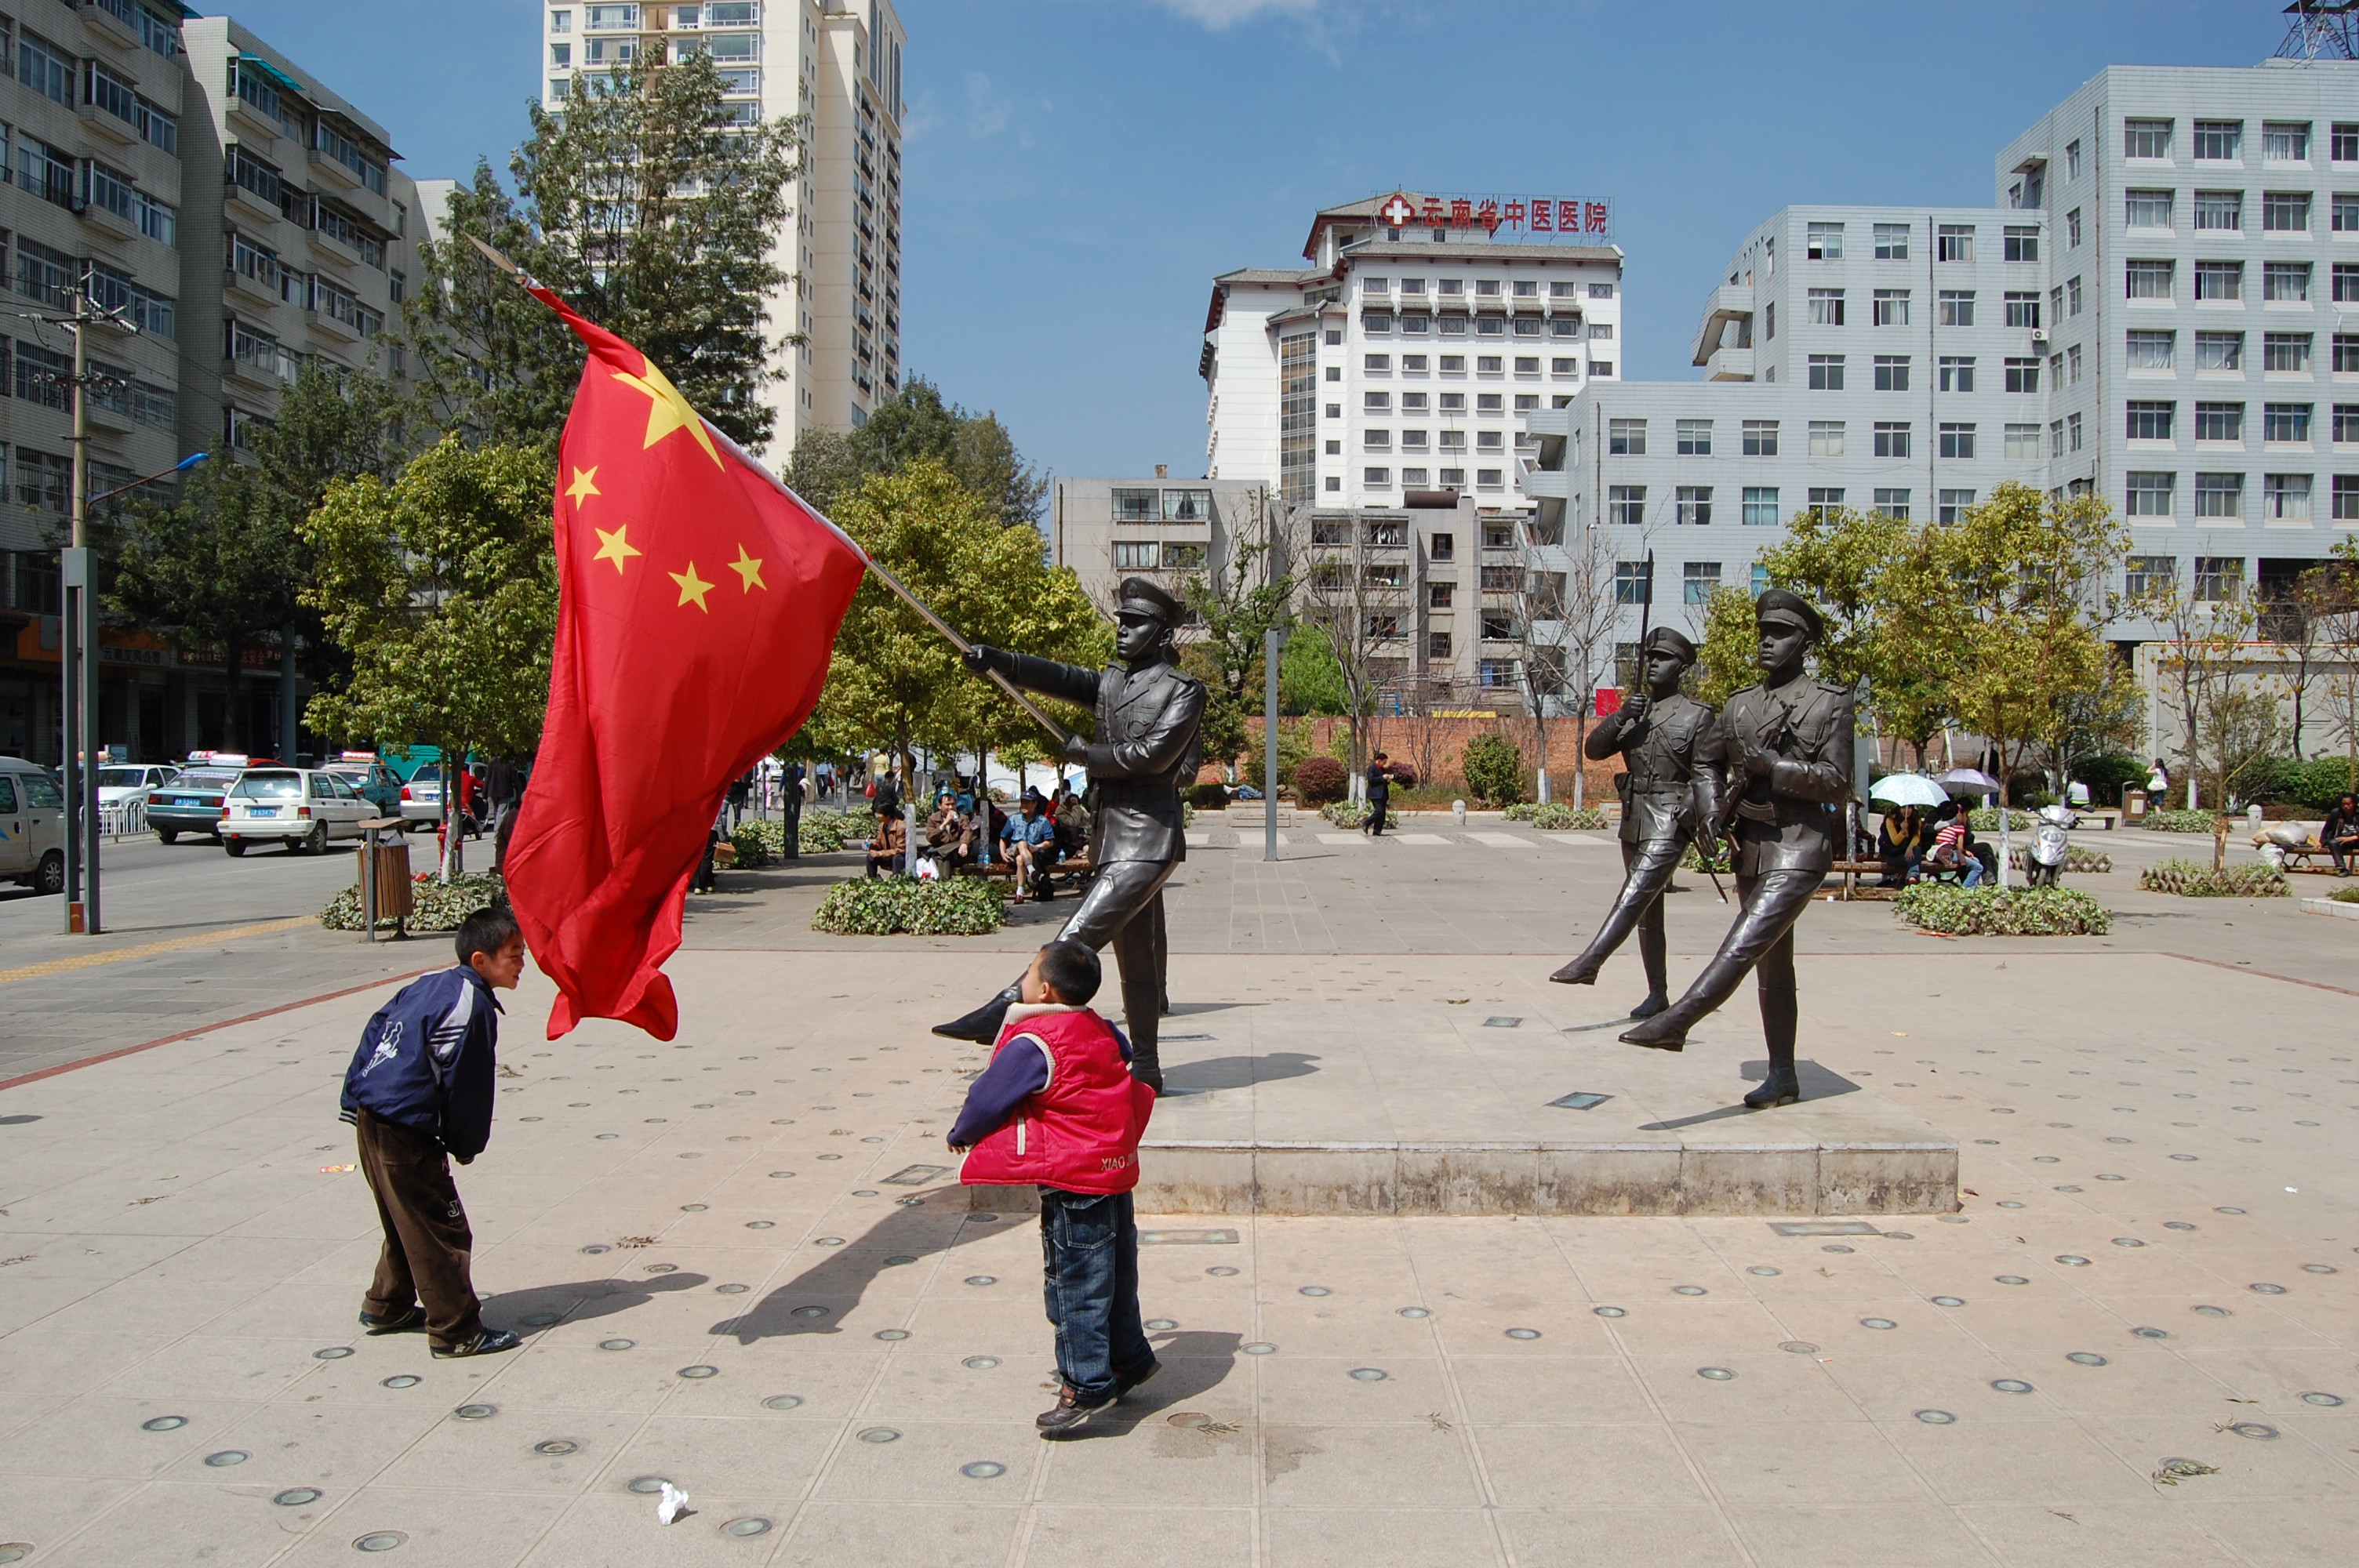 After four decades of extraordinary growth, China is confronted with deeper structural issues in its economy. : Image by Matt Spurr available at  https://tinyurl.com/3rx2r5kr CC BY 2.0 DEED